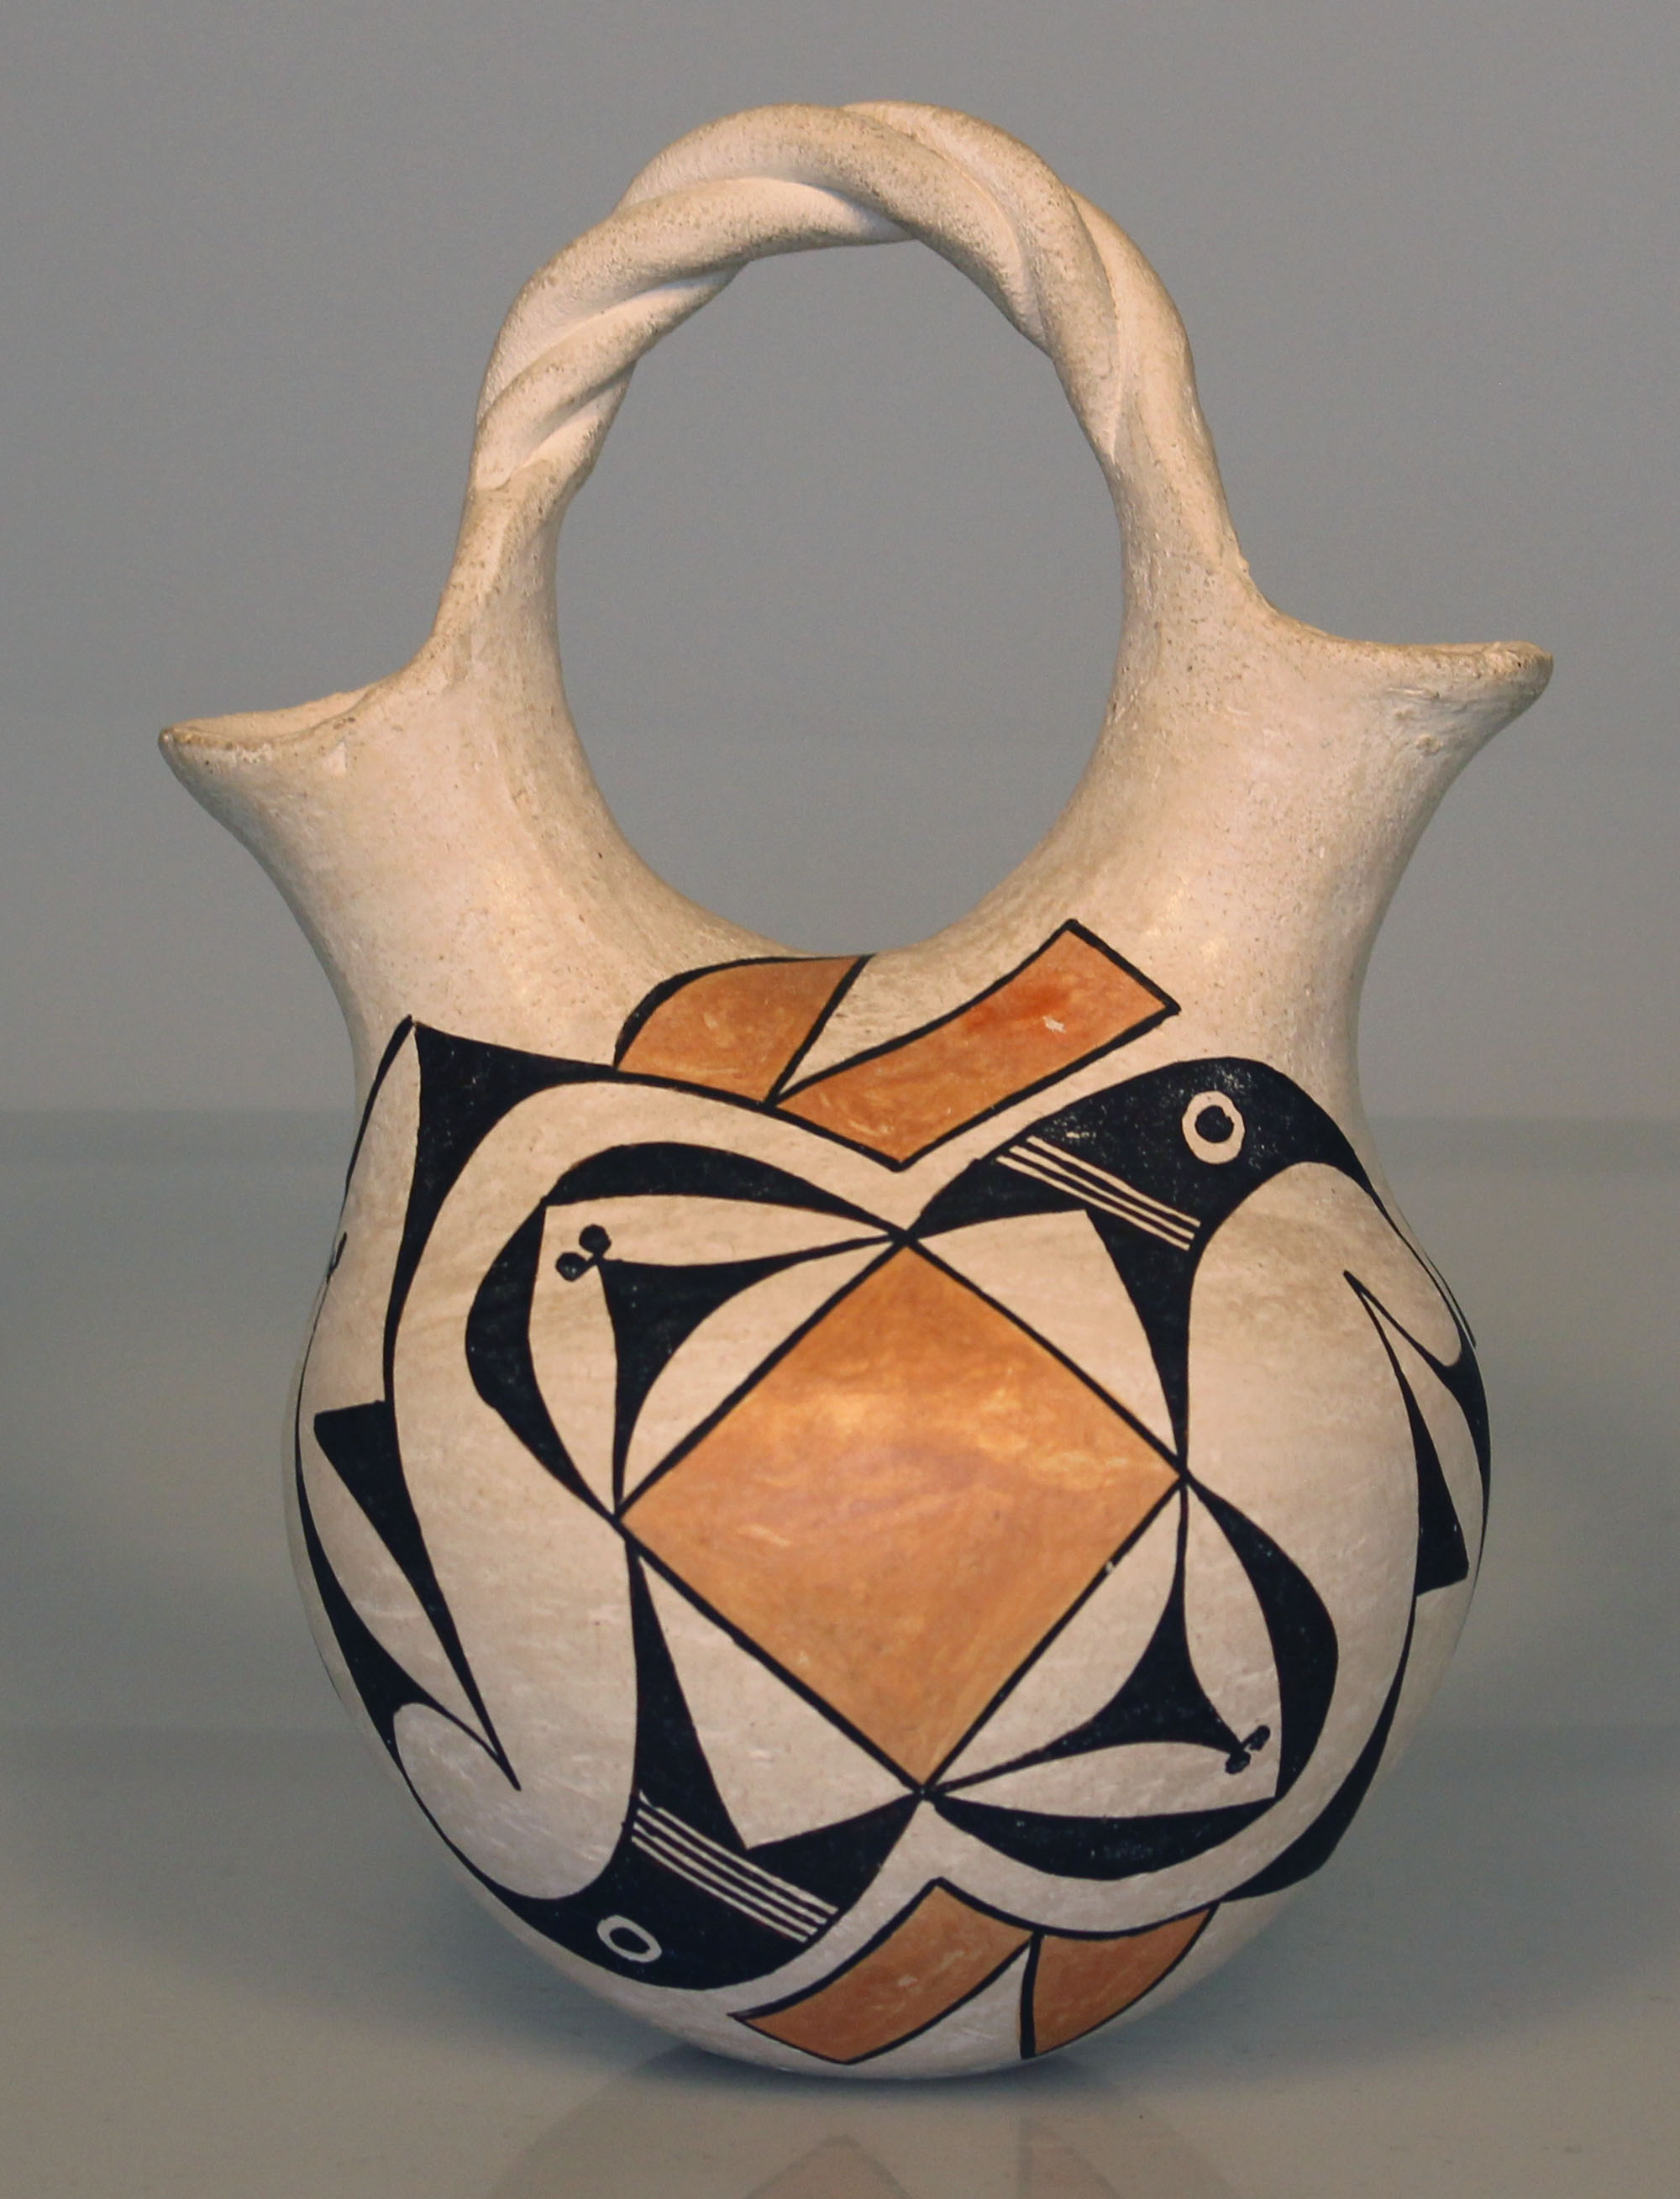 Wedding vase by Lucy Lewis, white with geometric black and orange designs.